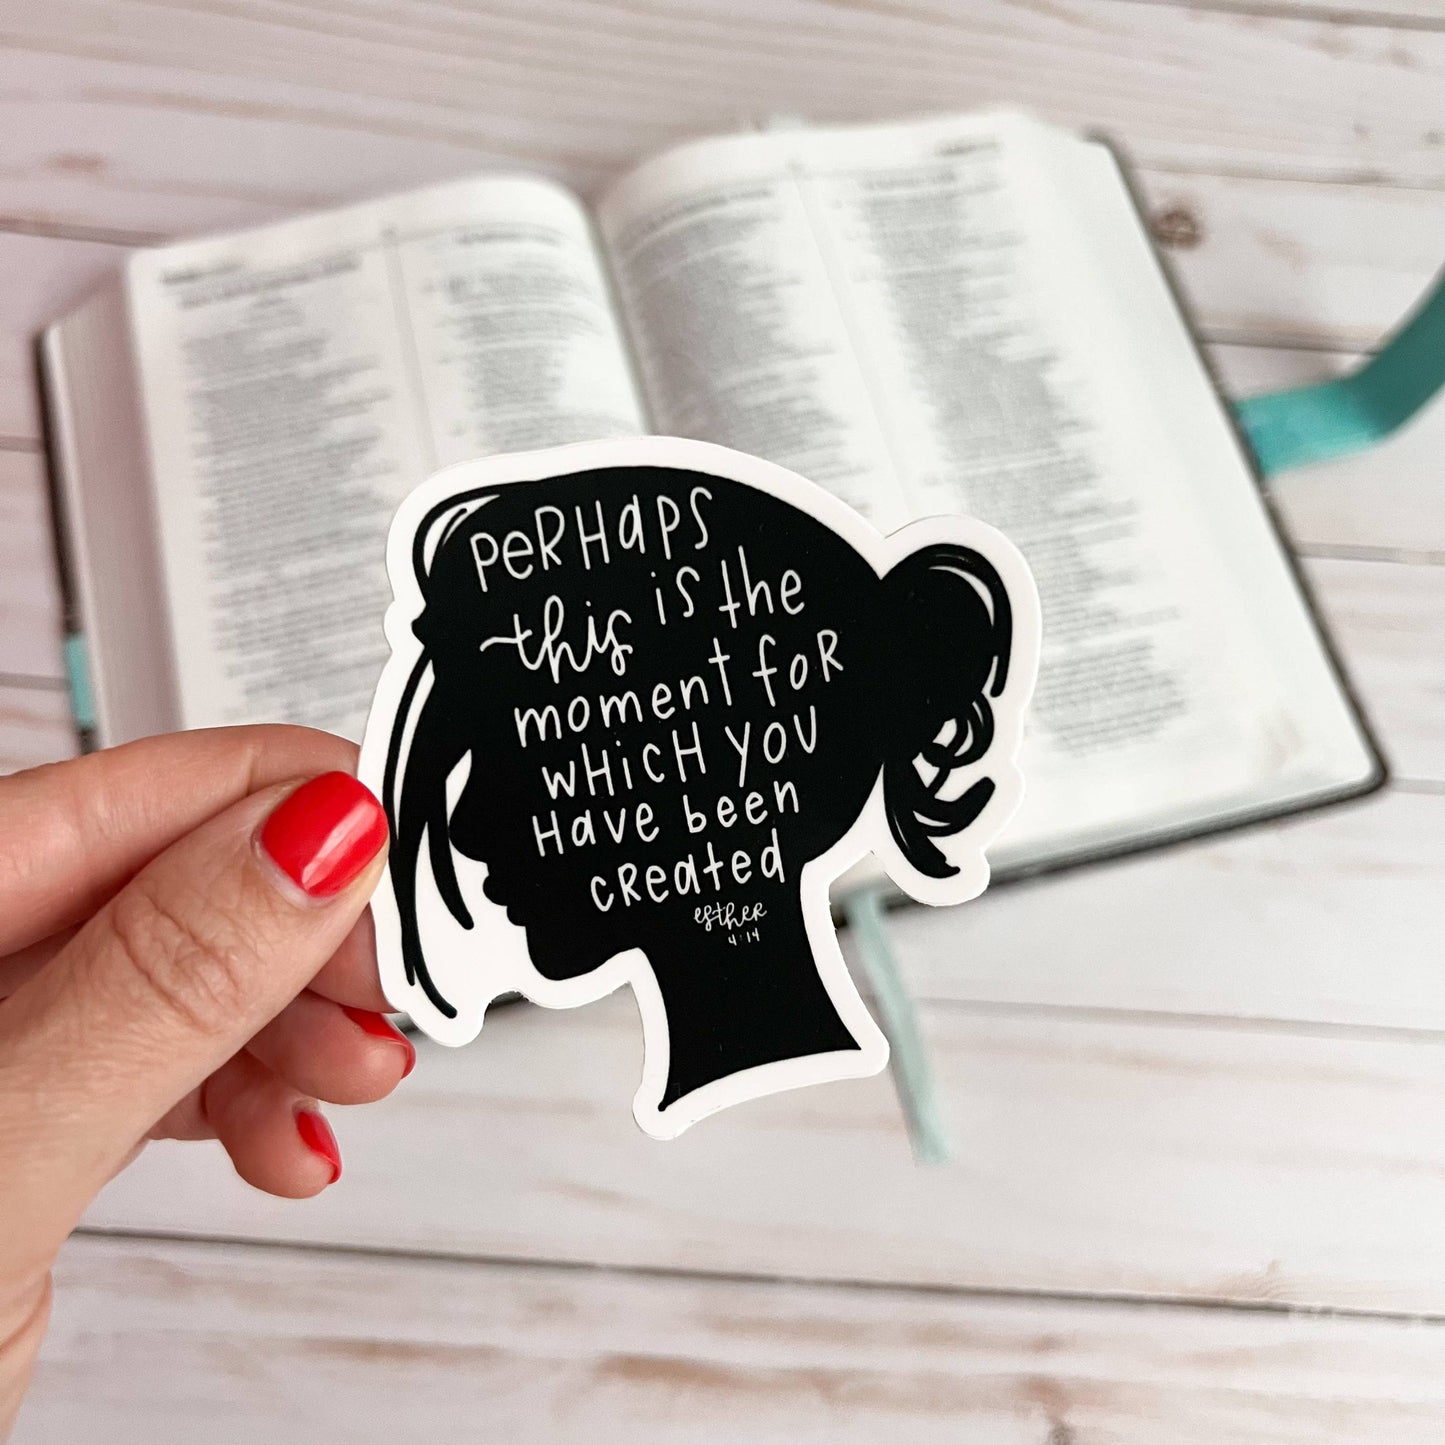 Esther 4:14 Sticker *FREE SHIPPING with any order over $10